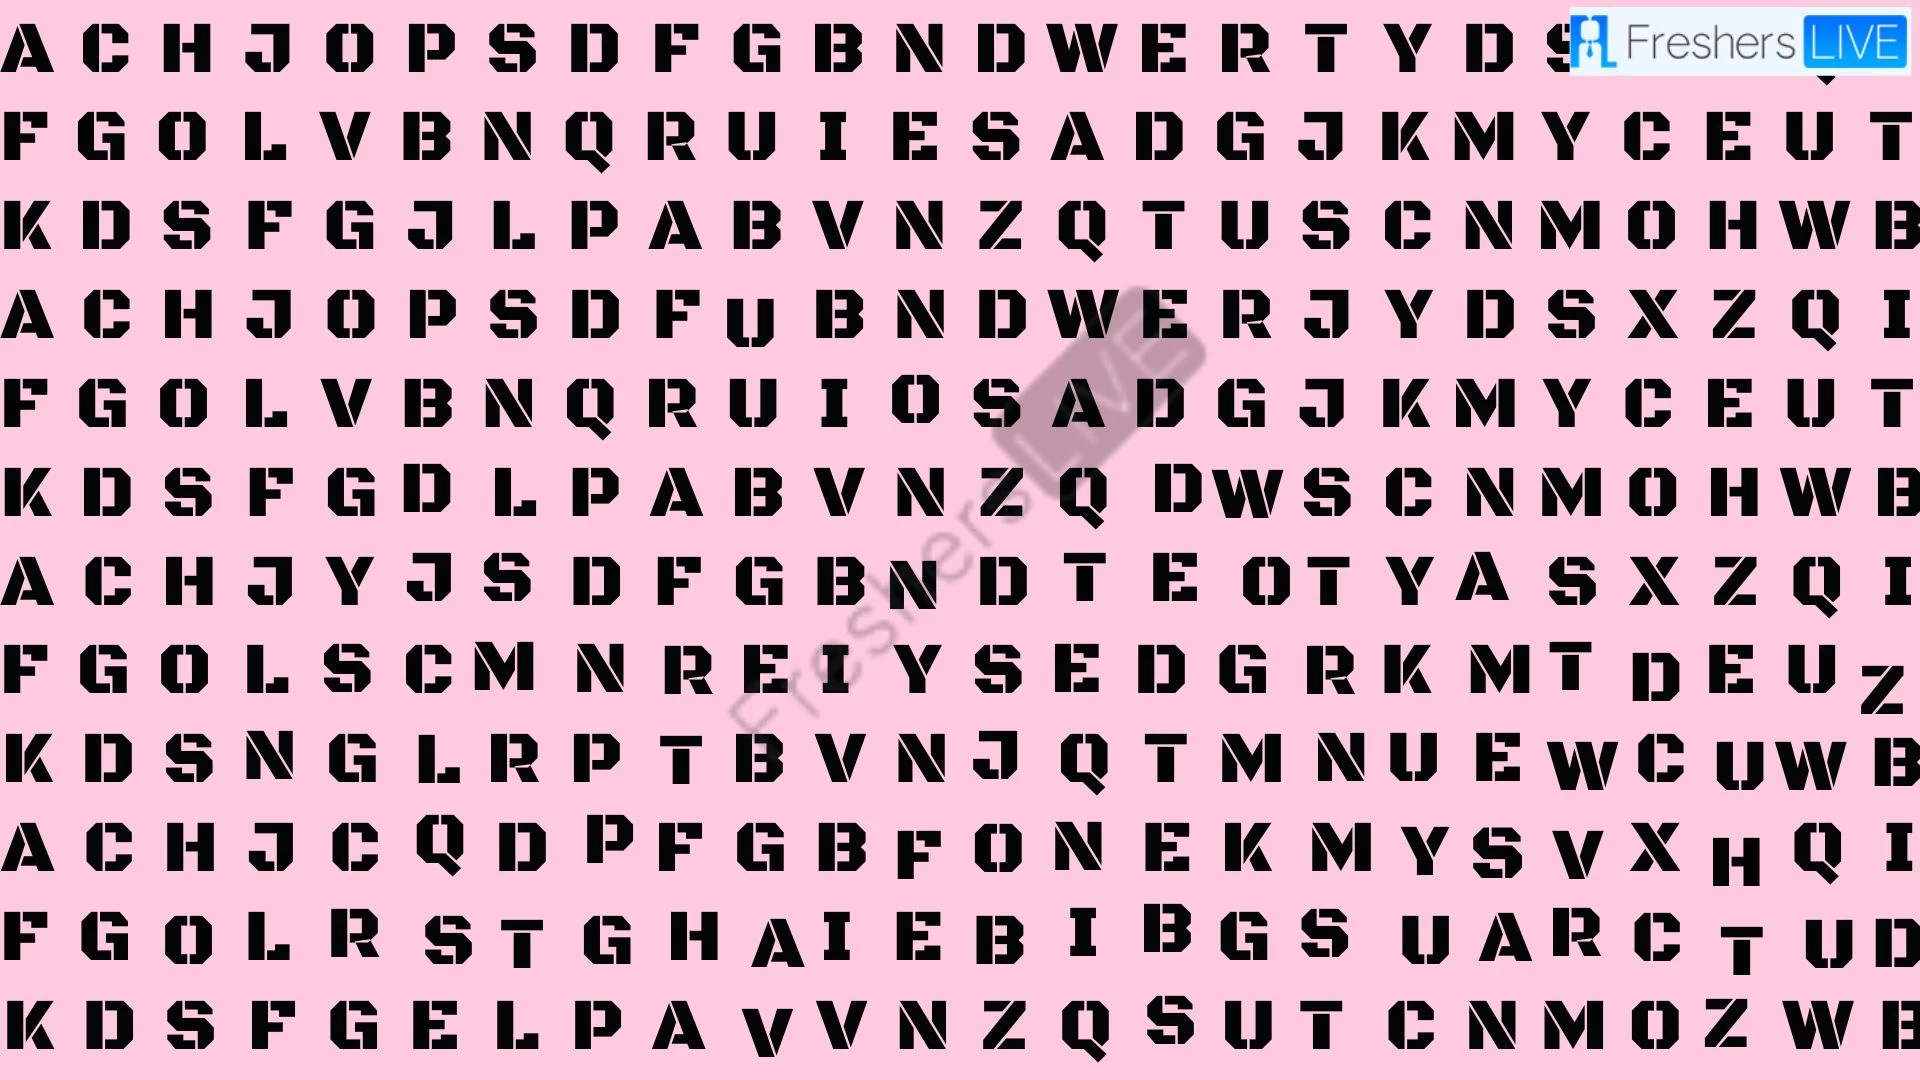 Are you smart enough to Find the word Catch in Just 10 Secs?